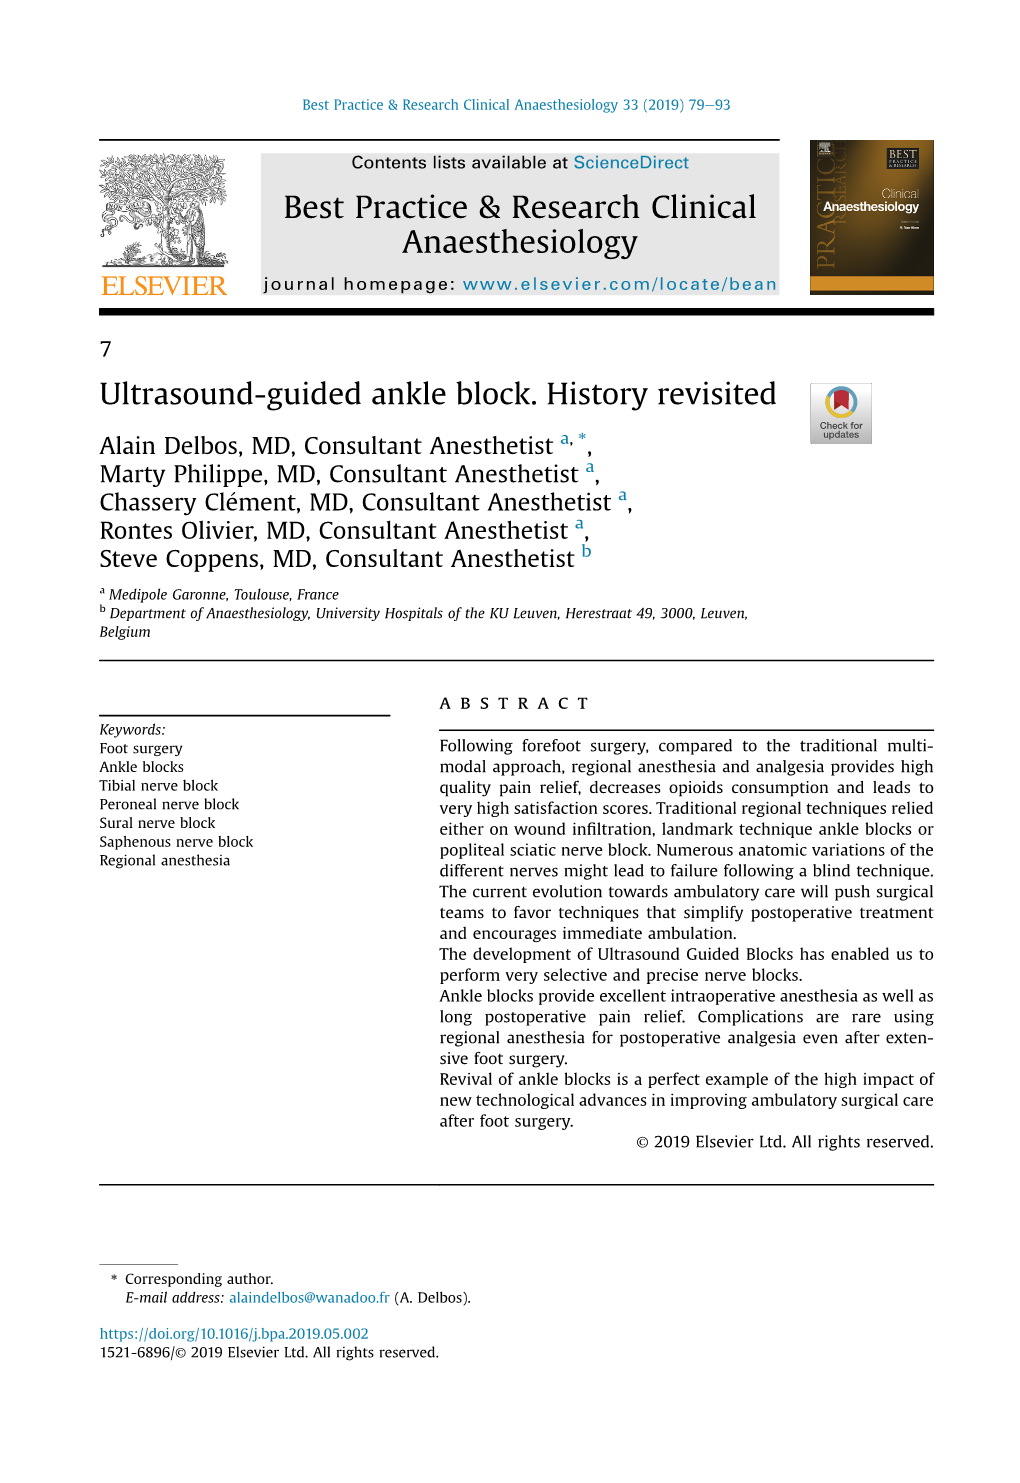 Ultrasound-Guided Ankle Block. History Revisited